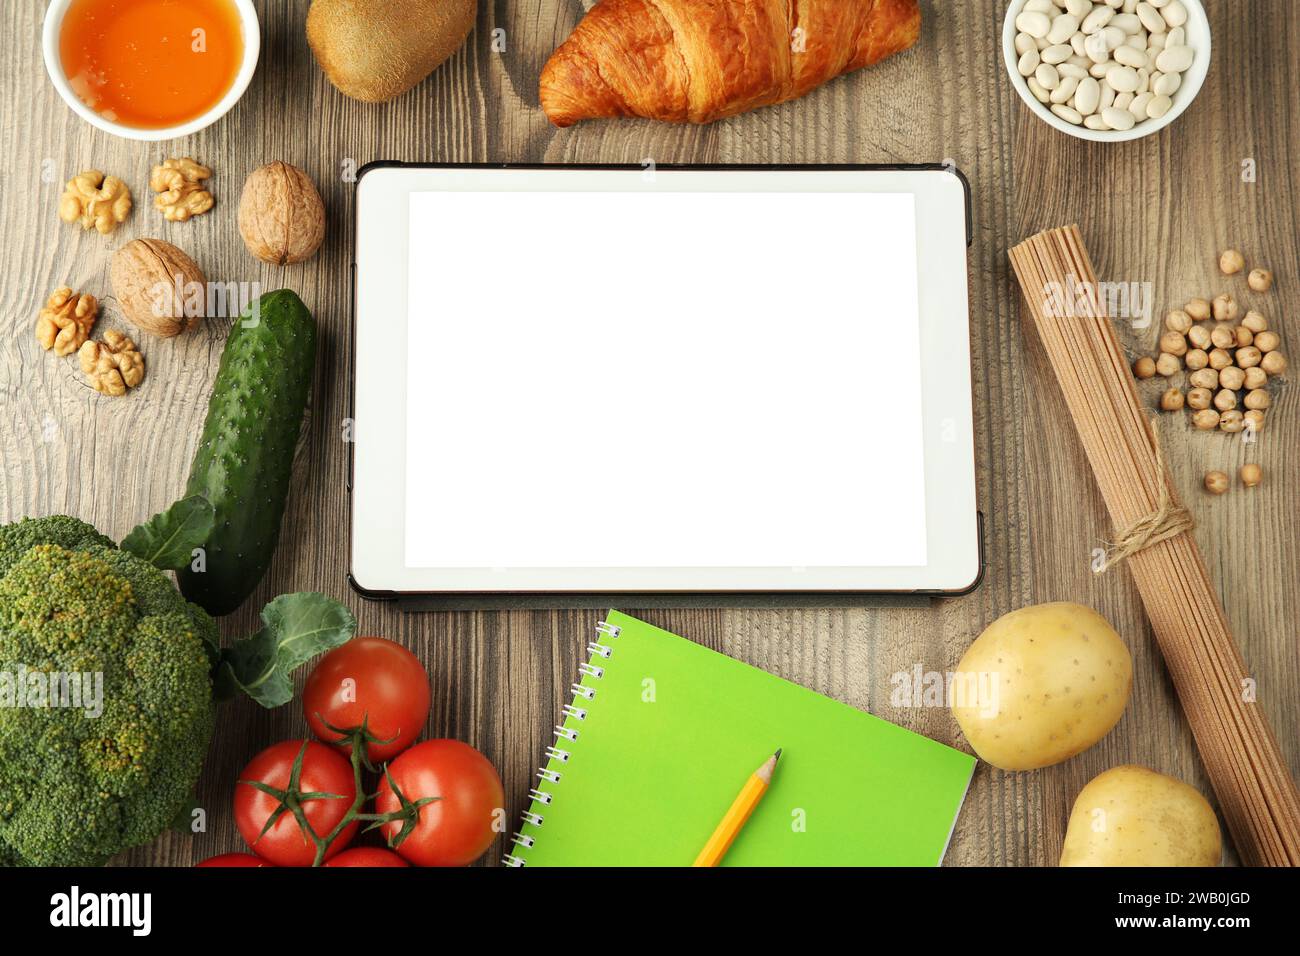 Glycemic index. Tablet with blank screen, different products and notebook on wooden table, flat lay Stock Photo